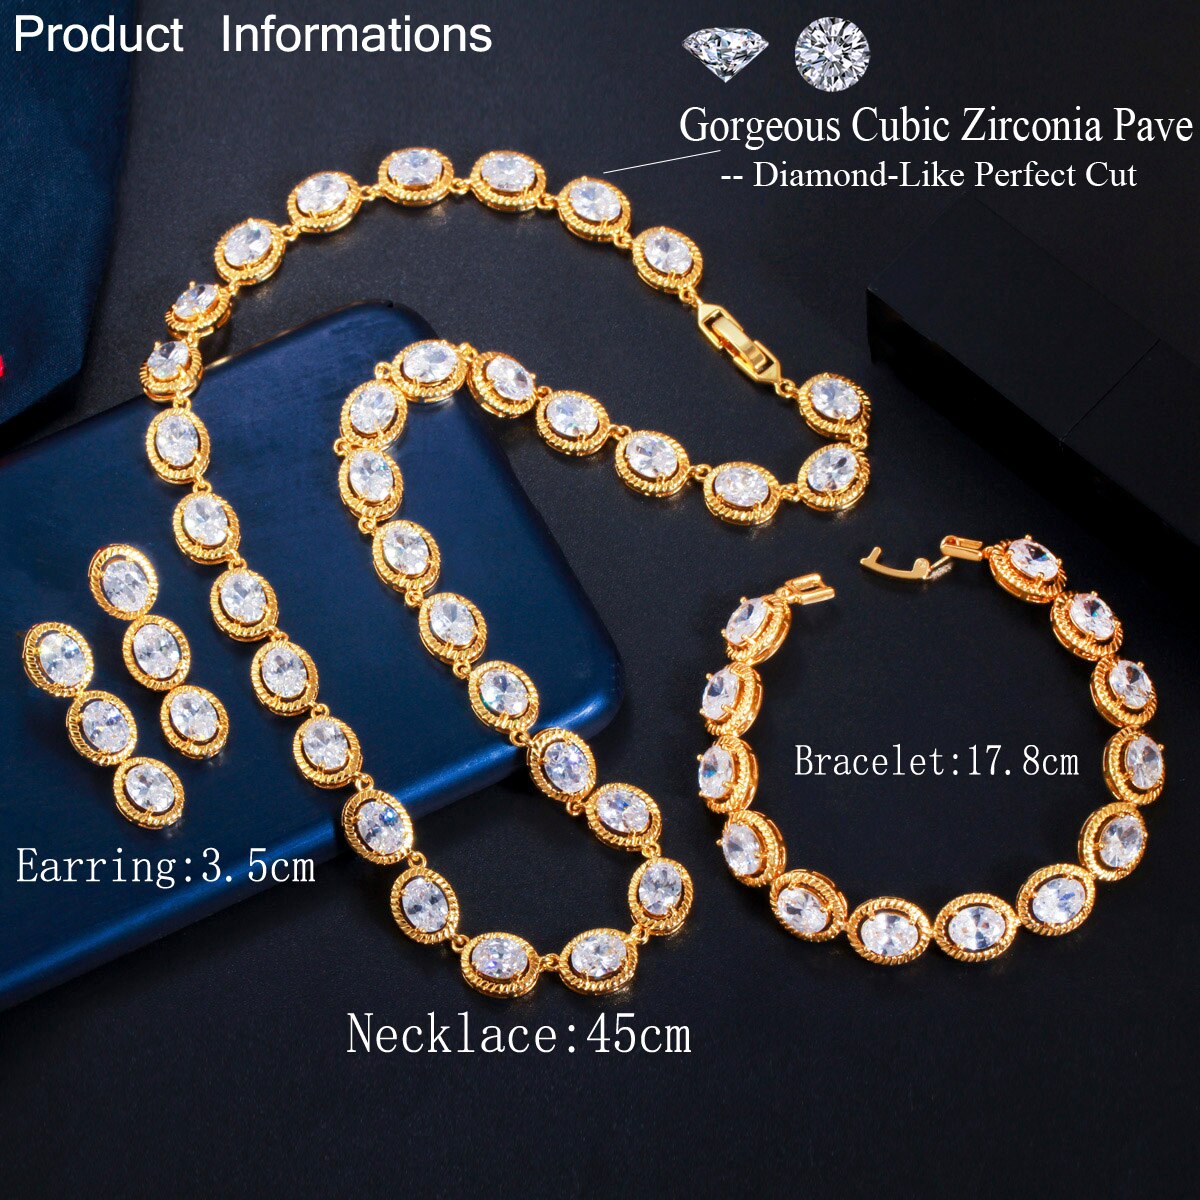 ThreeGraces-Gorgeous-Nigerian-Gold-Color-3pcs-White-Big-Round-CZ-Women-Wedding-Party-Necklace-Earrin-1005001603867521-2